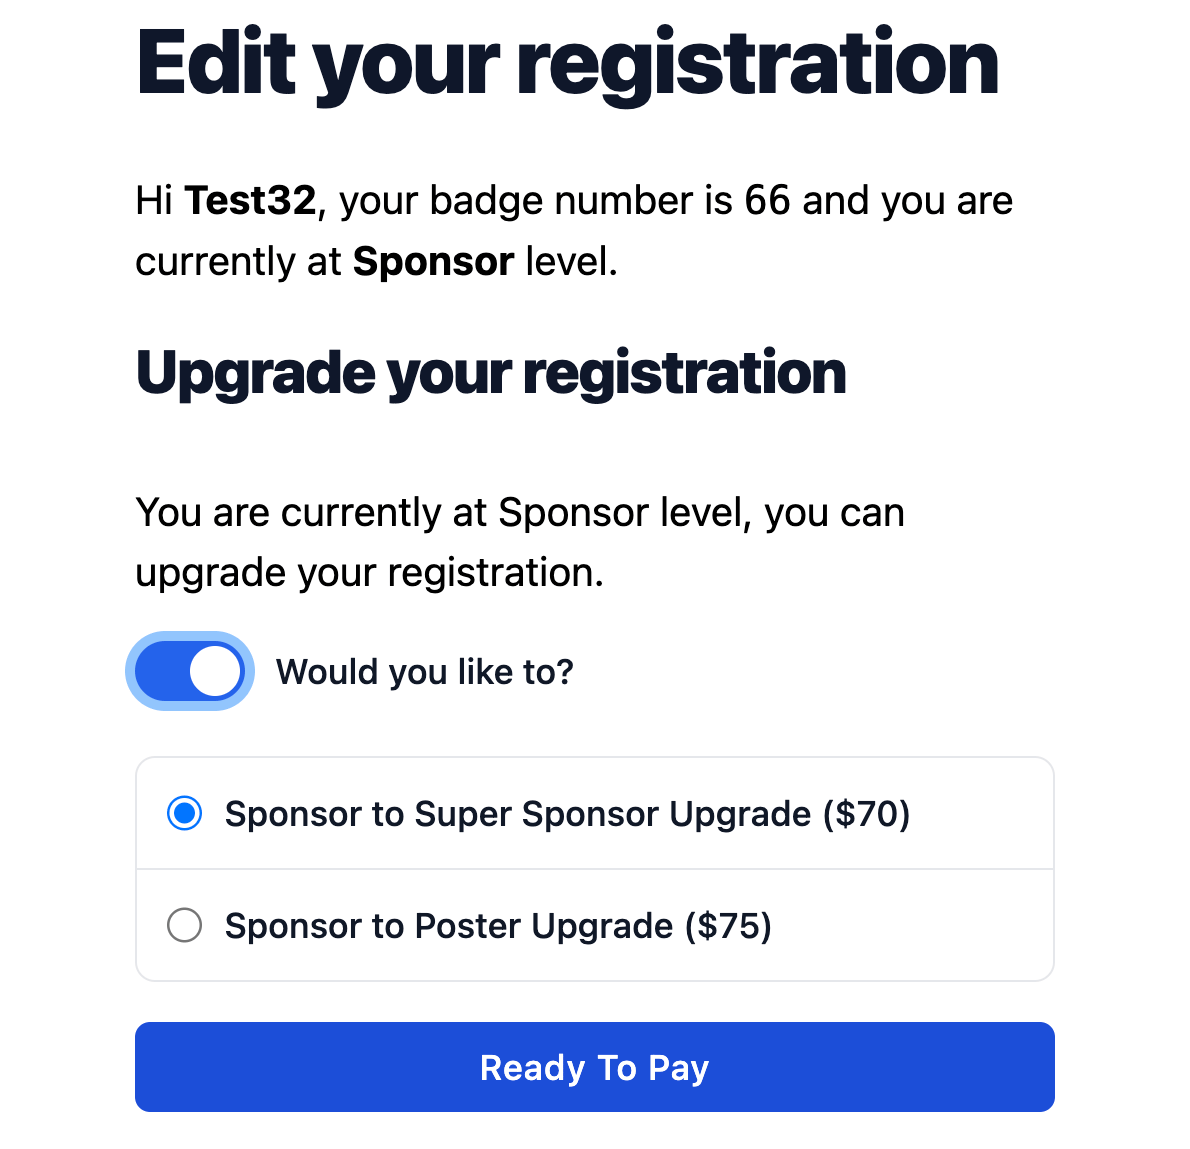 Edit your registration, you are at sponsor, would you like to upgrade?